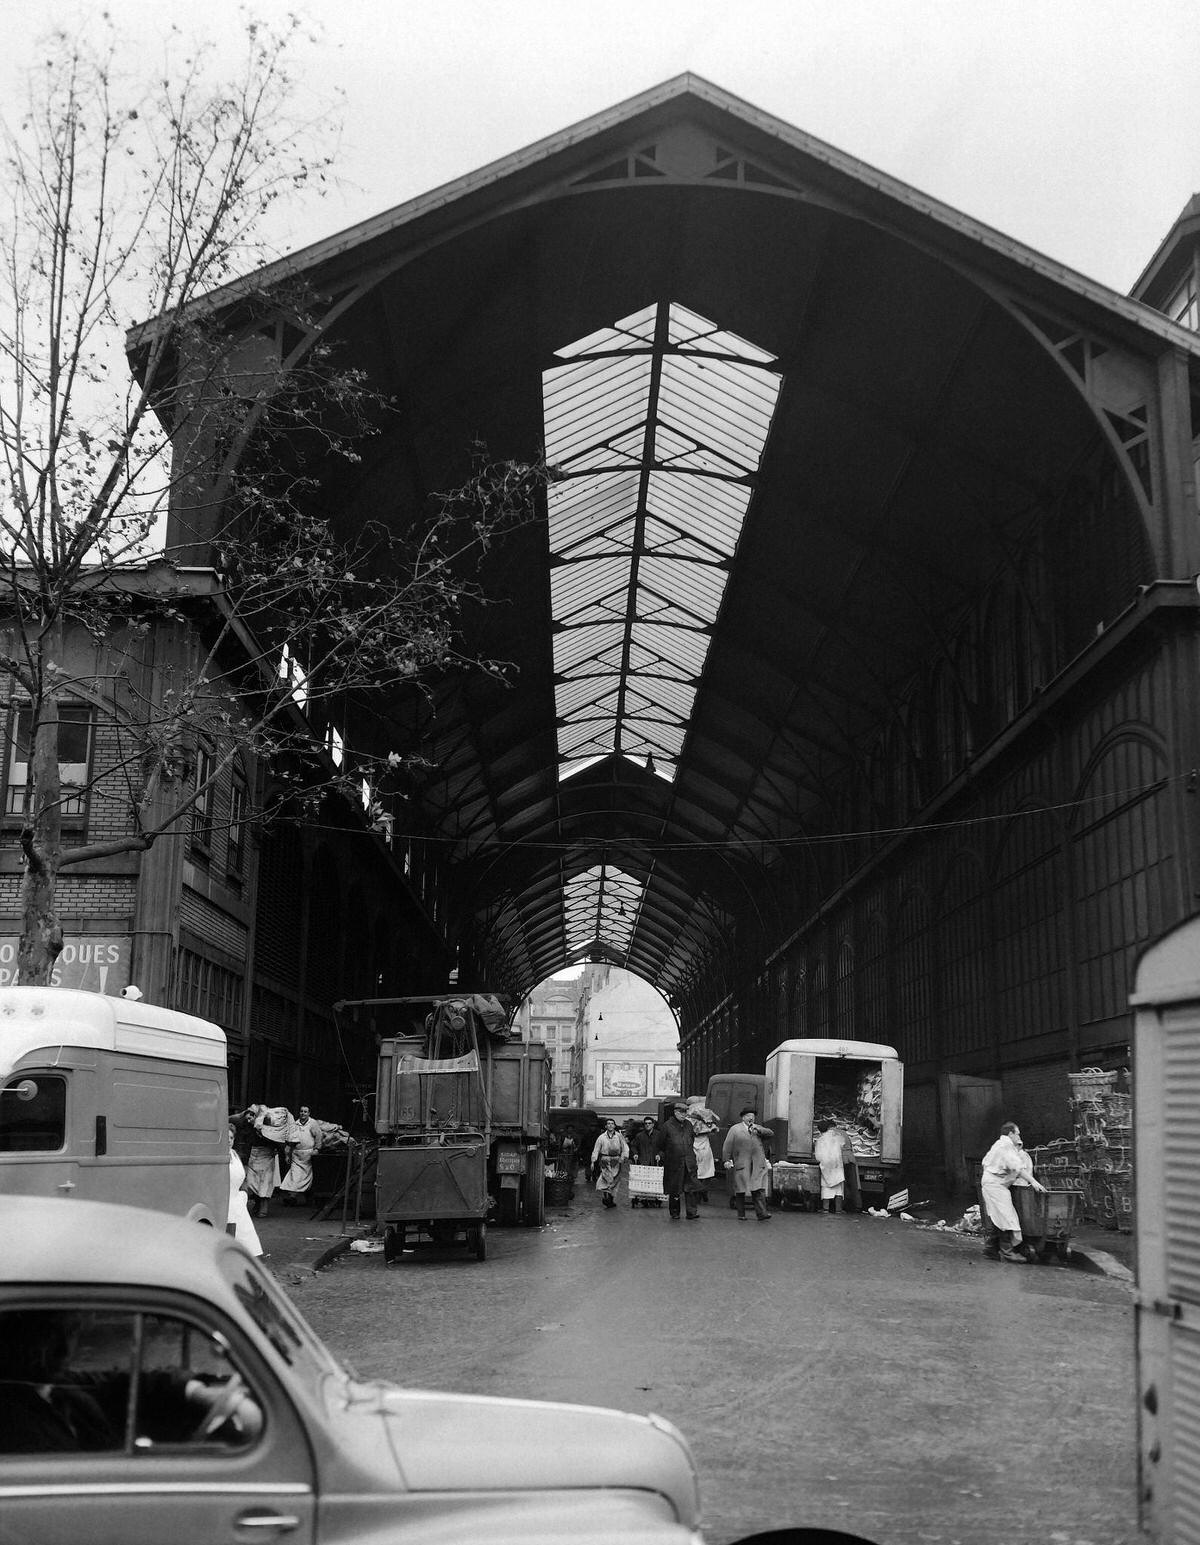 Market of Les Halles in Paris, France, on February 22, 1962.